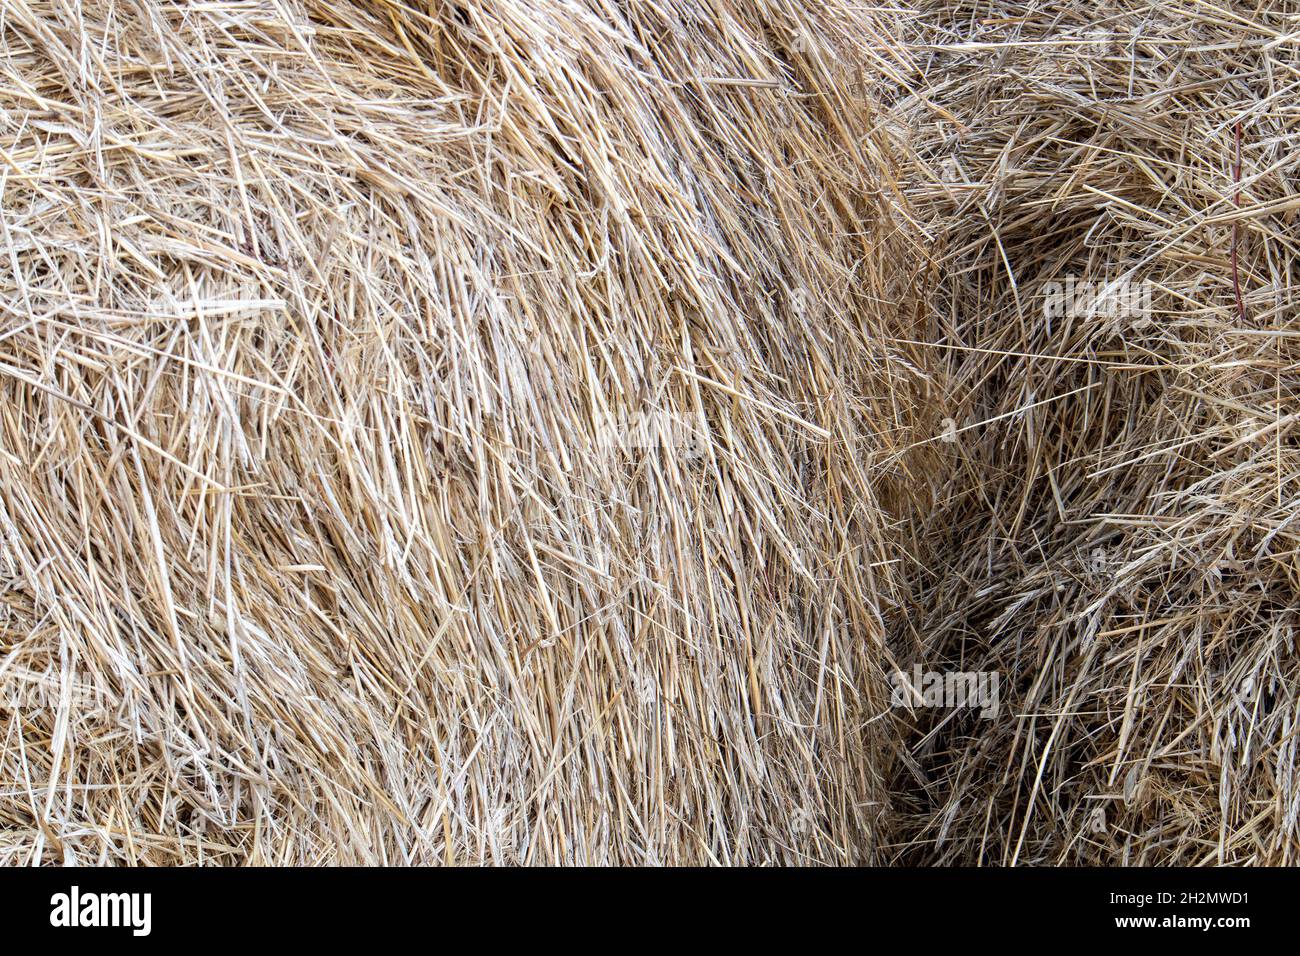 Dry straw texture, large hay stack after harvest season close up, natural background Stock Photo